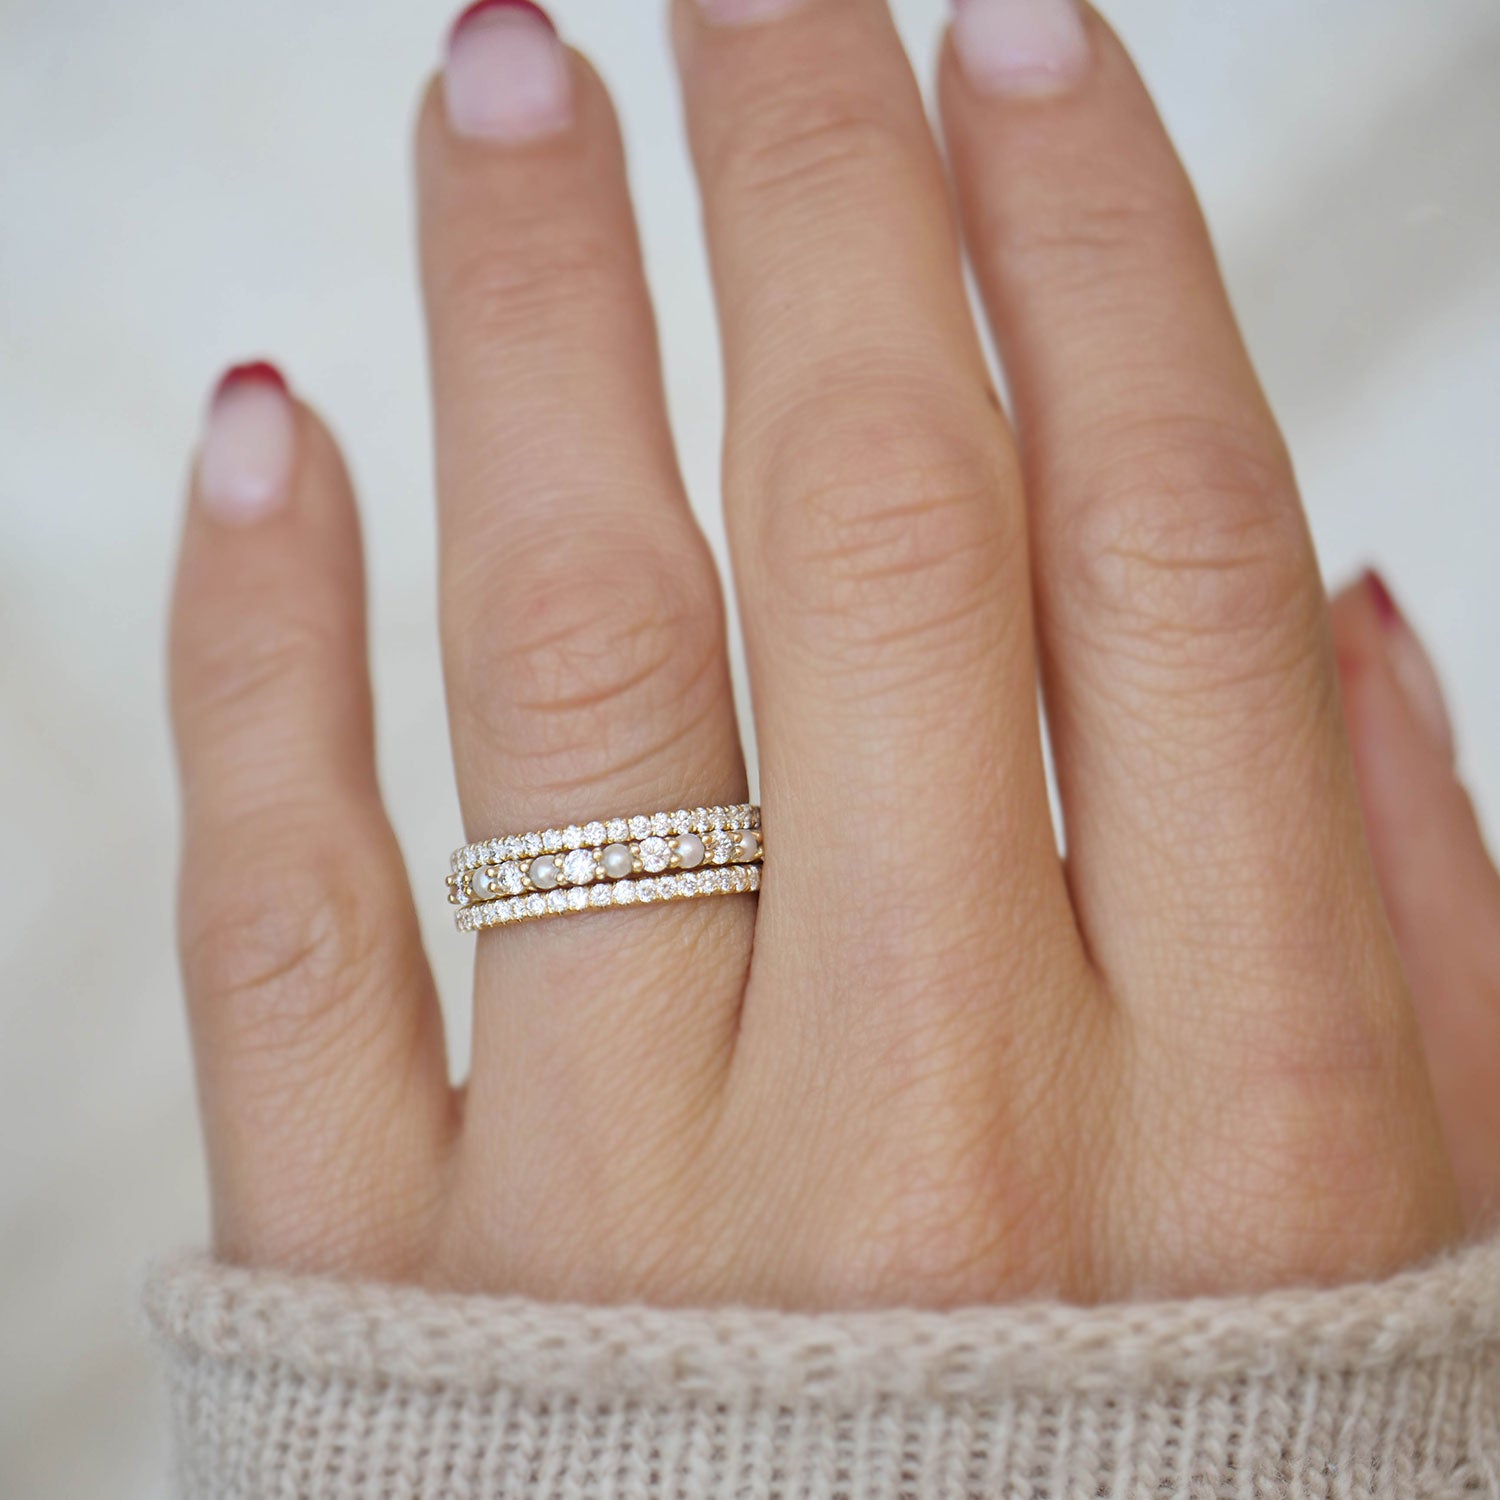 A Diamond on Every Finger: How to Stack Your Diamond Rings, rings